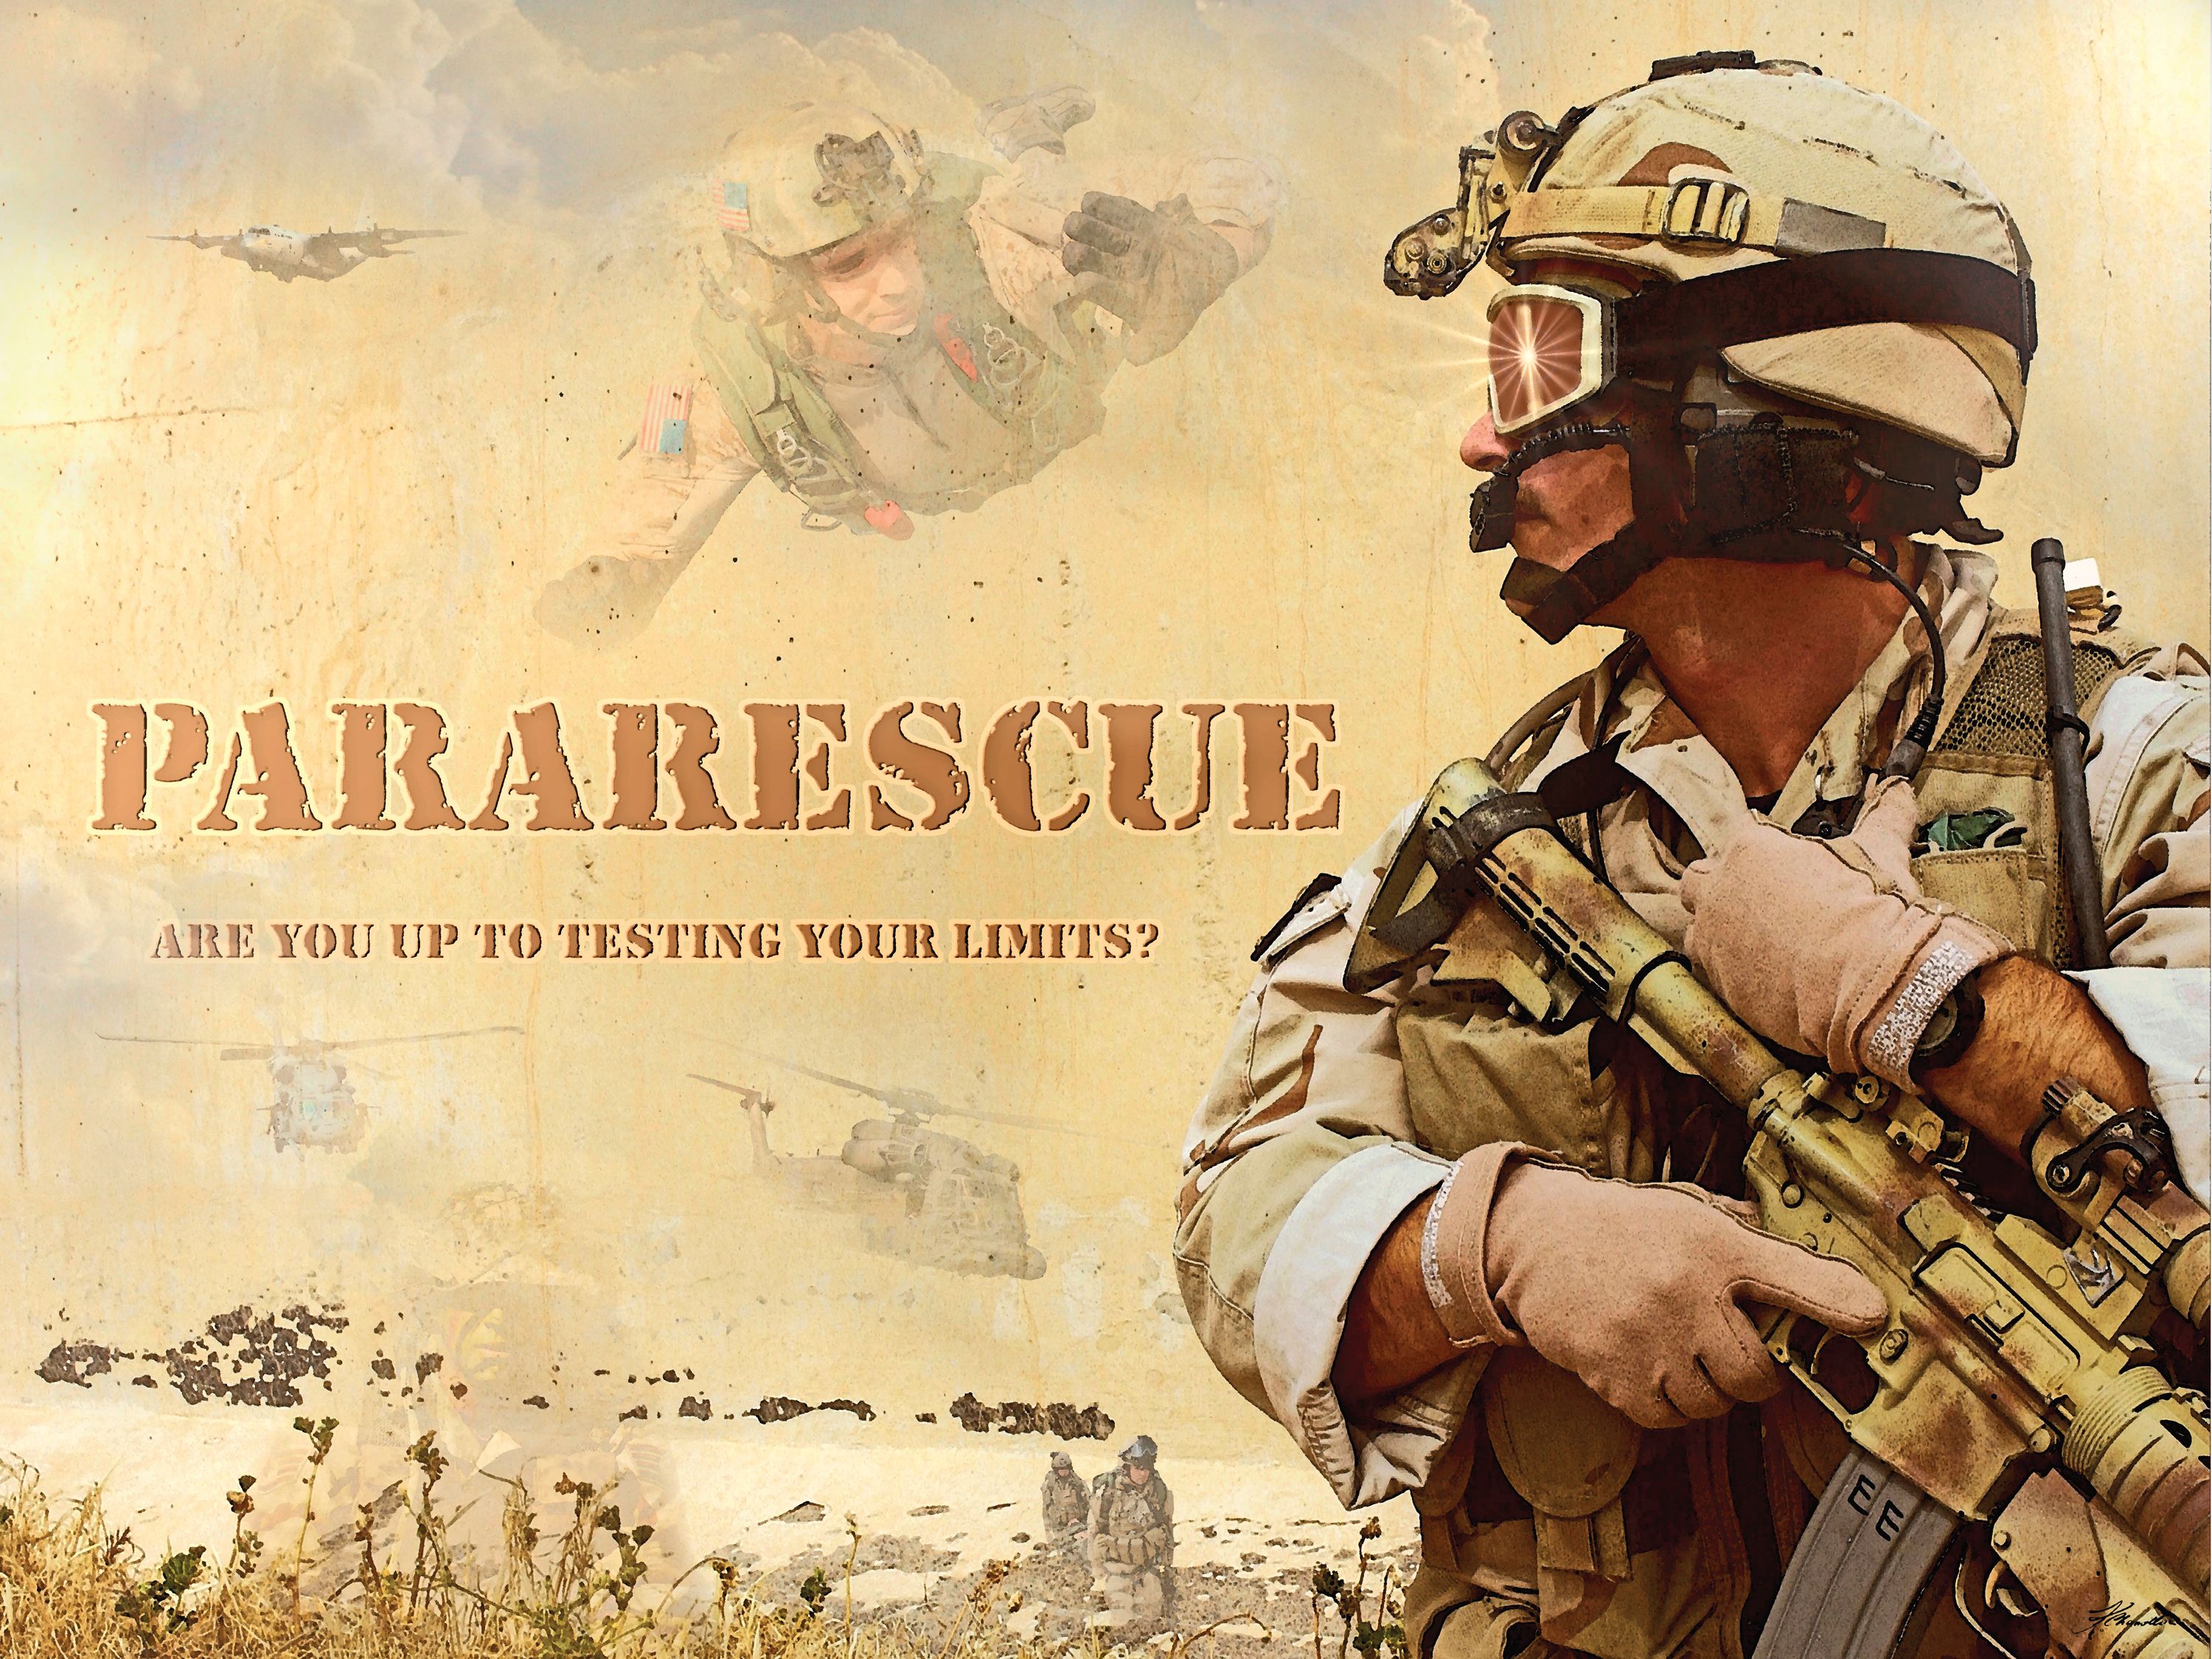 Air Force Pararescue wallpapers, Military, HQ Air Force Pararescue pictures